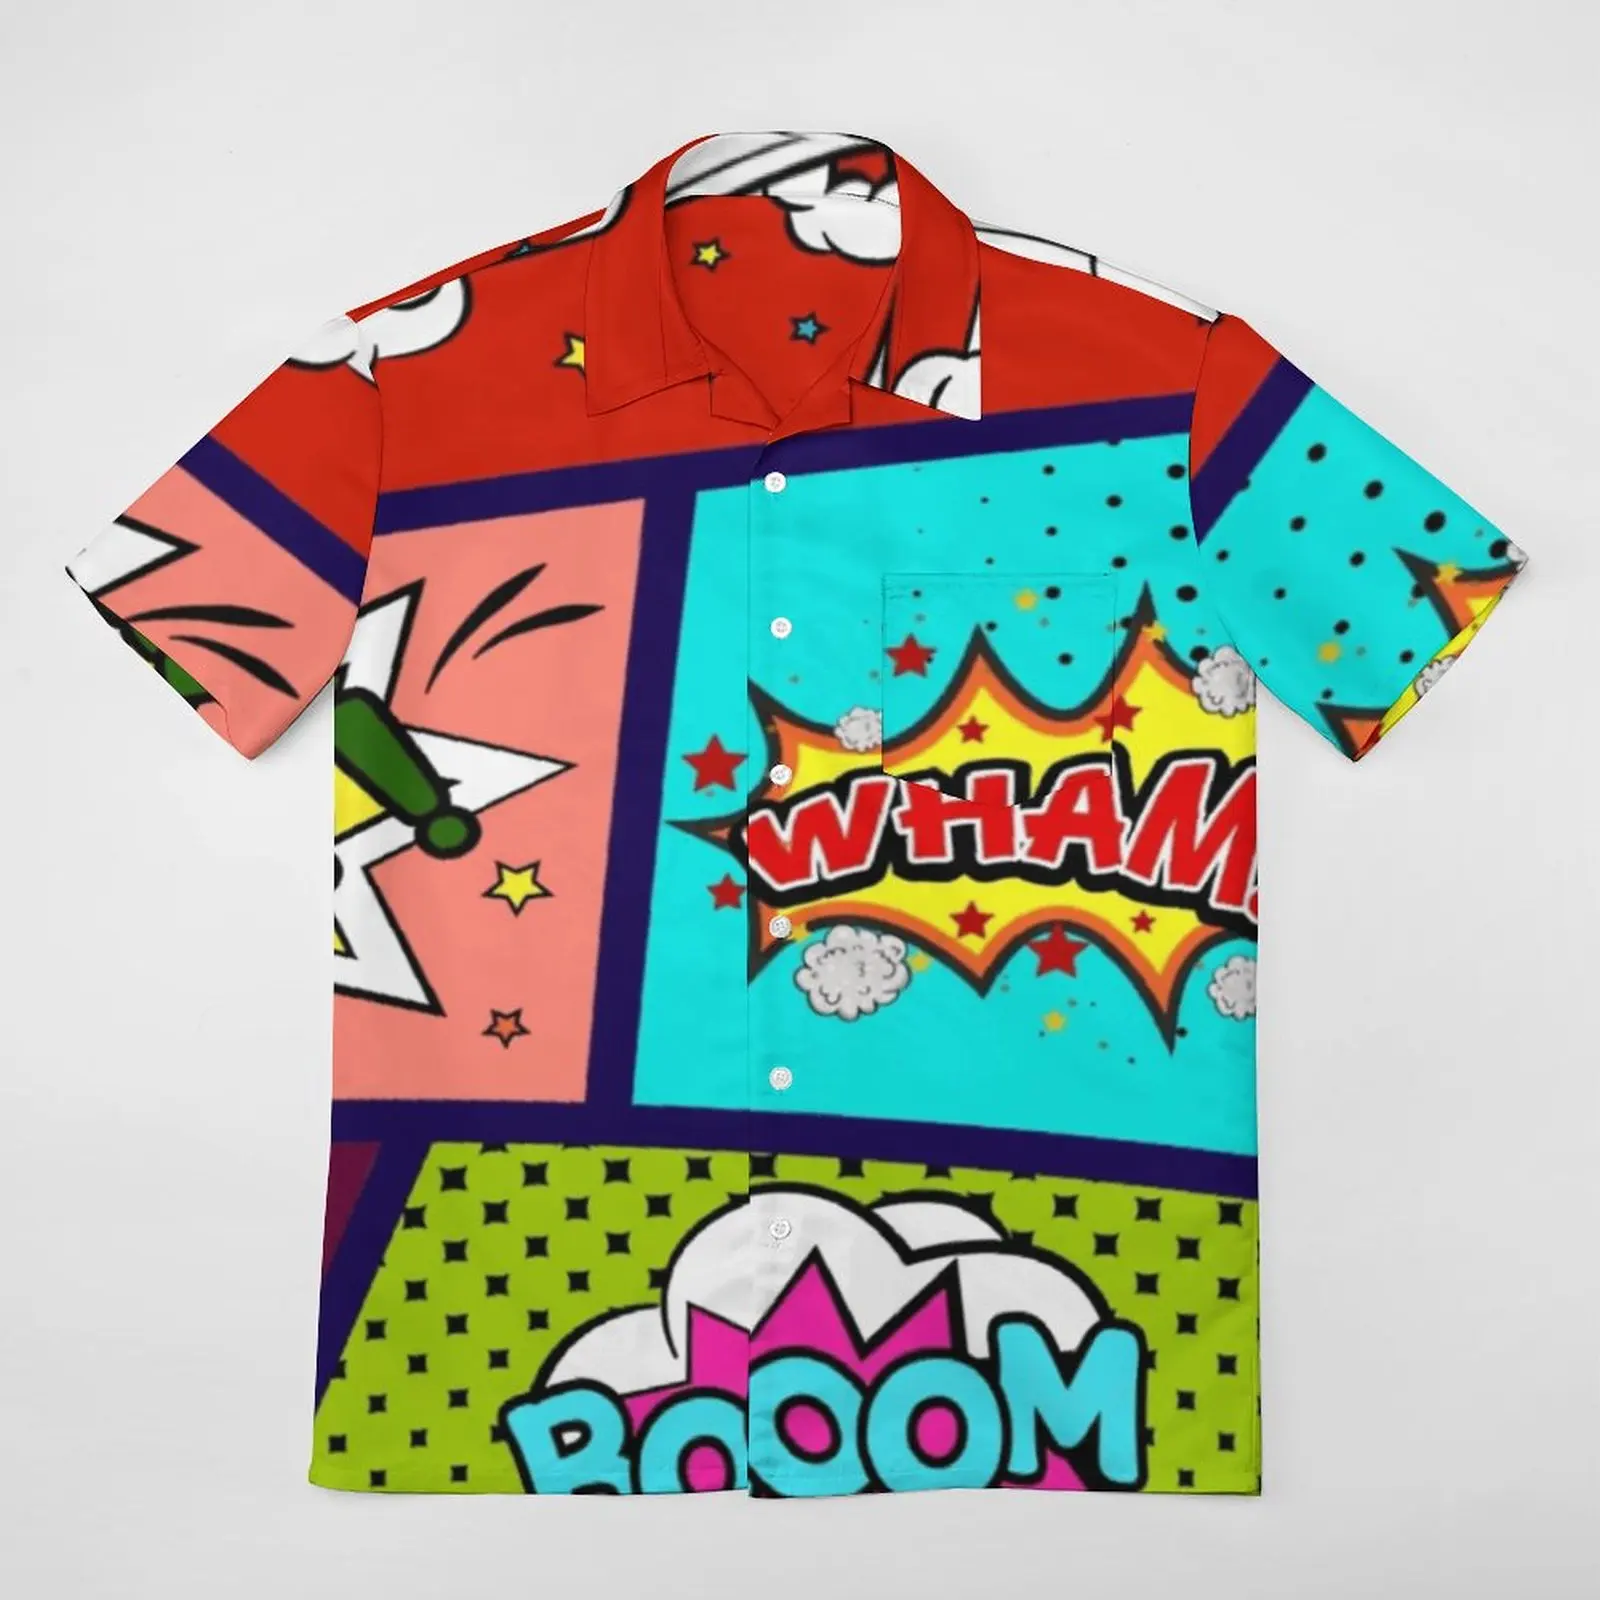 

Panels Crazy Colorful And Bright Comic Book Panels Arts-1 Tshirt Top Quality Suit High Quality A Short Sleeved Shirt Home USA Si